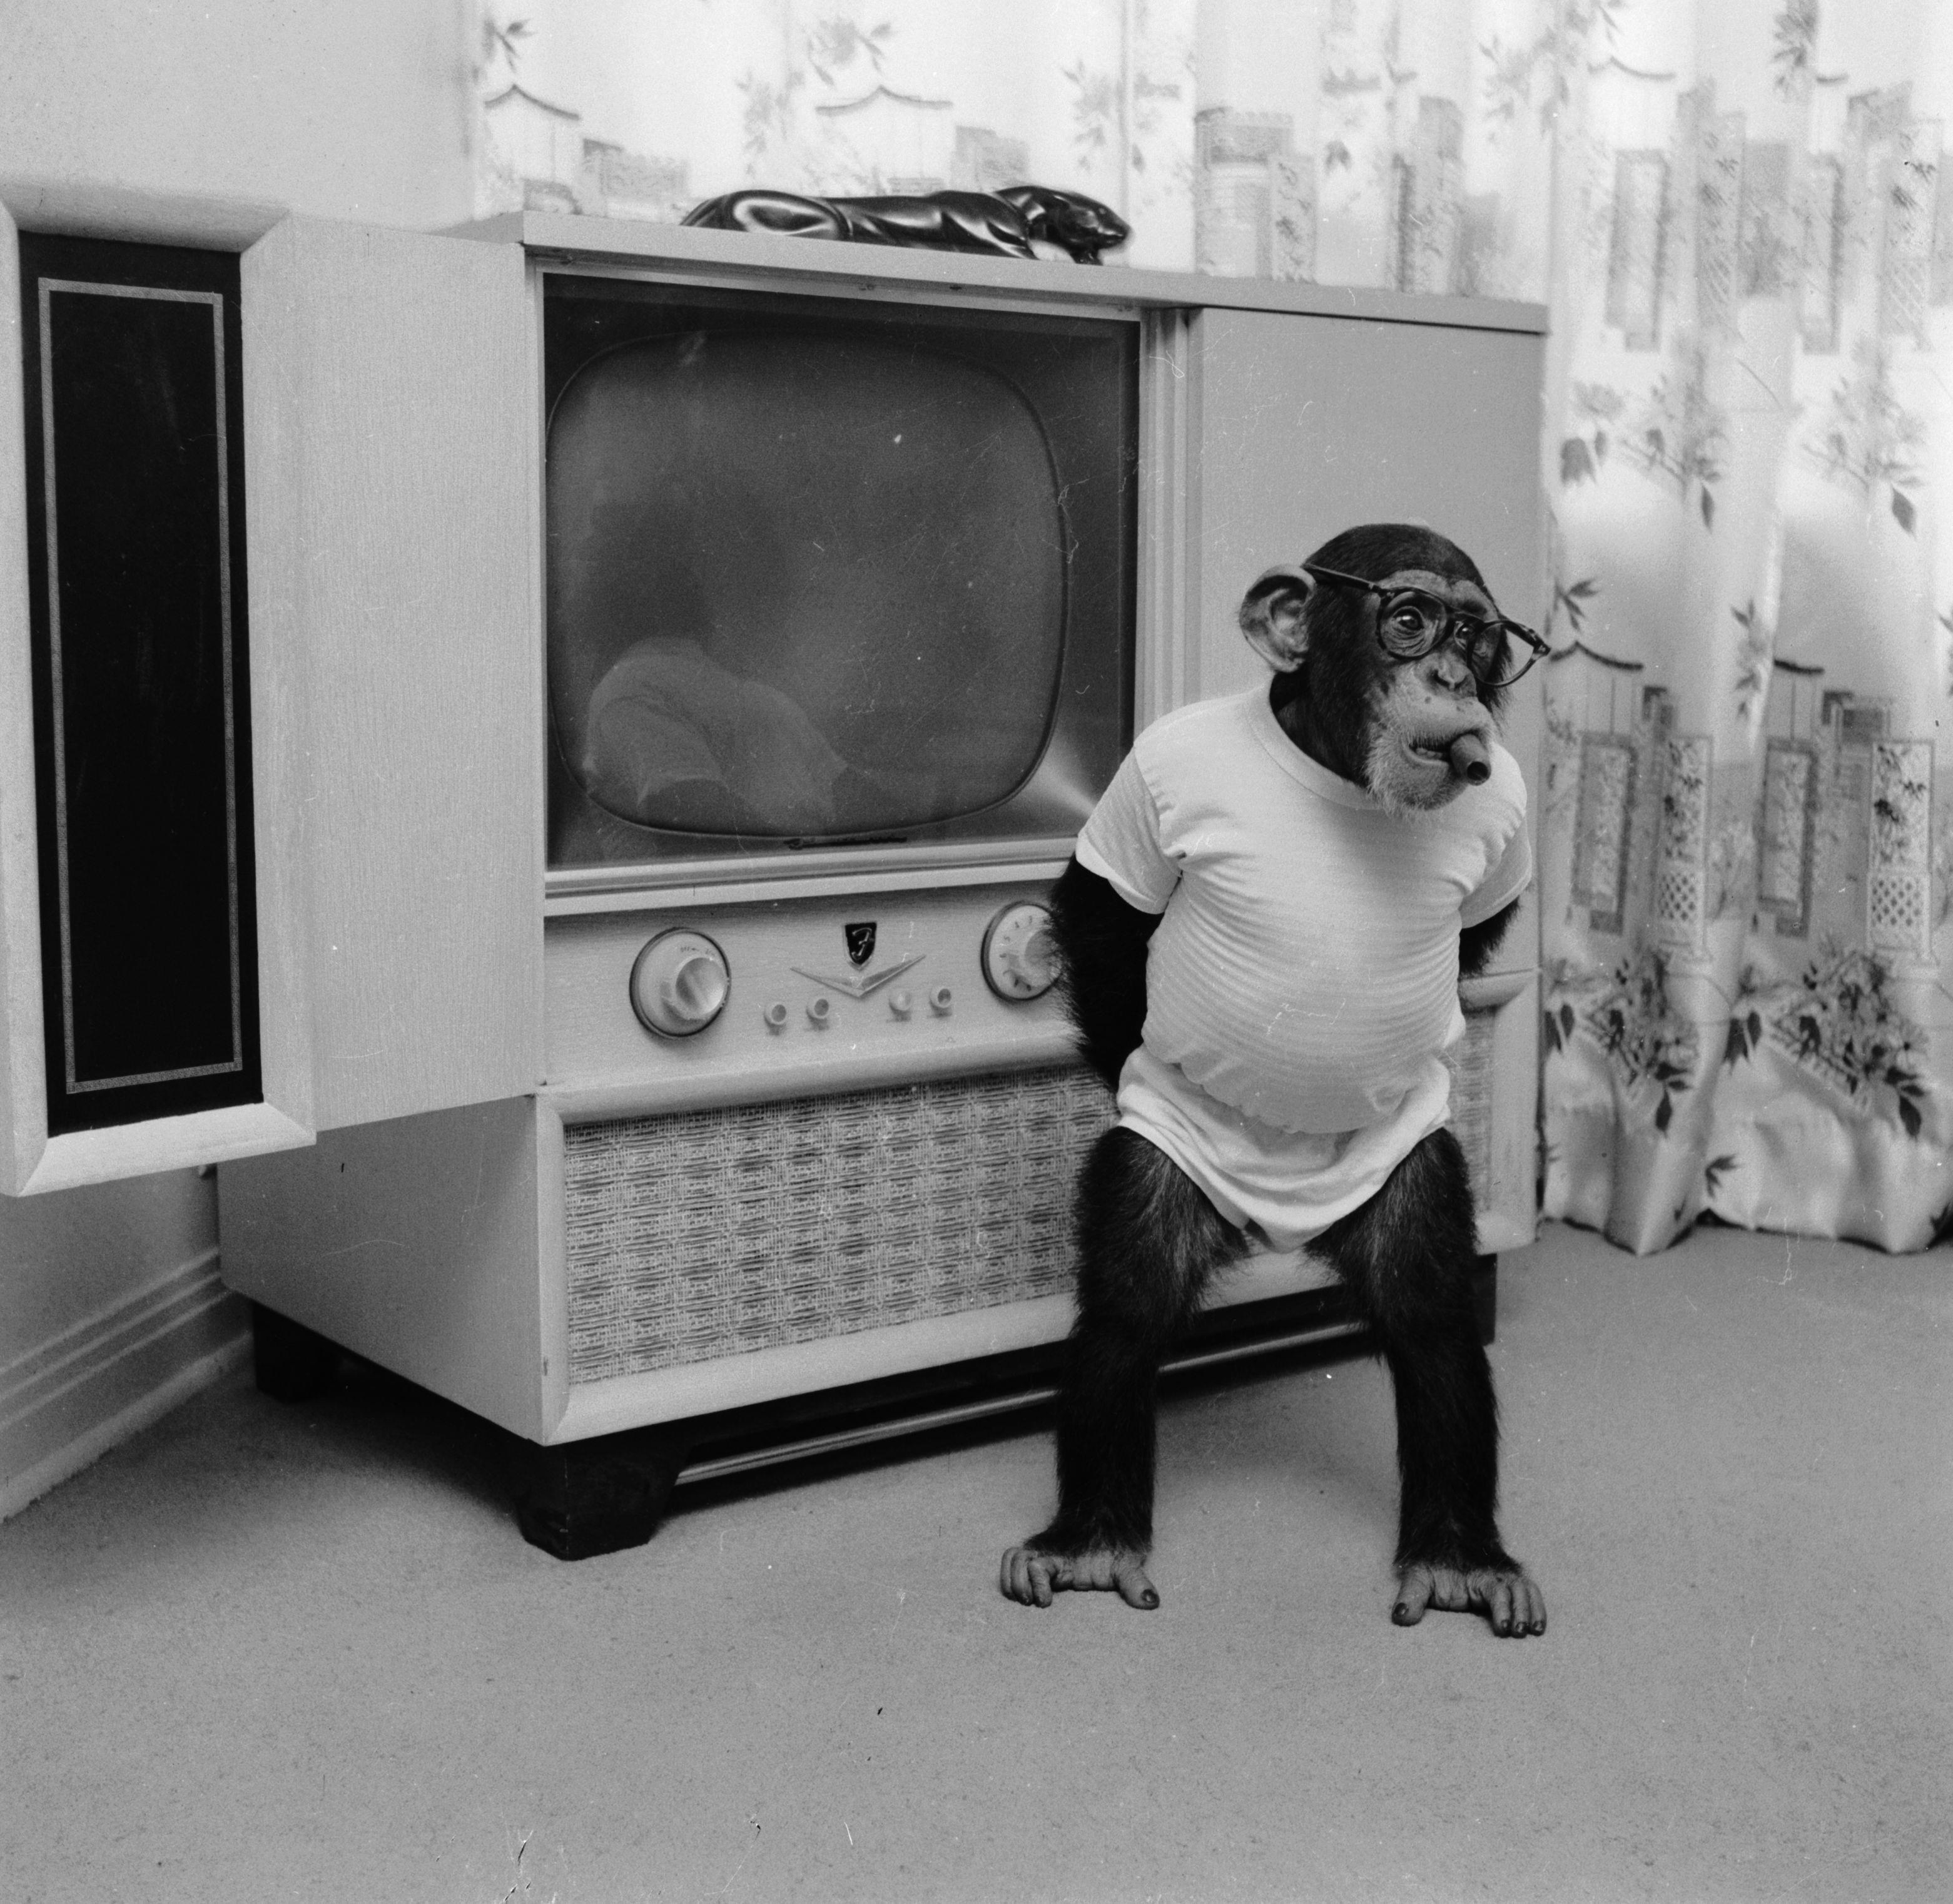 <p>Yes, Elvis had a chimpanzee named Scatter, who was known for pulling down women's skirts. Elvis liked to dress him up in costumes, and would drive around Memphis with Scatter in the front seat. Eventually, Scatter's misbehavior became too much for Elvis to handle and Scatter was sent to live in a climate-controlled room in Graceland. "Scatter wasn't the only animal friend who called Graceland home," says Christian Ross, marketing specialist at Graceland. "Elvis also had pet donkeys, peacocks, turkeys, just to name a few." These days, Ross says there are still horses at Graceland Stables. </p>